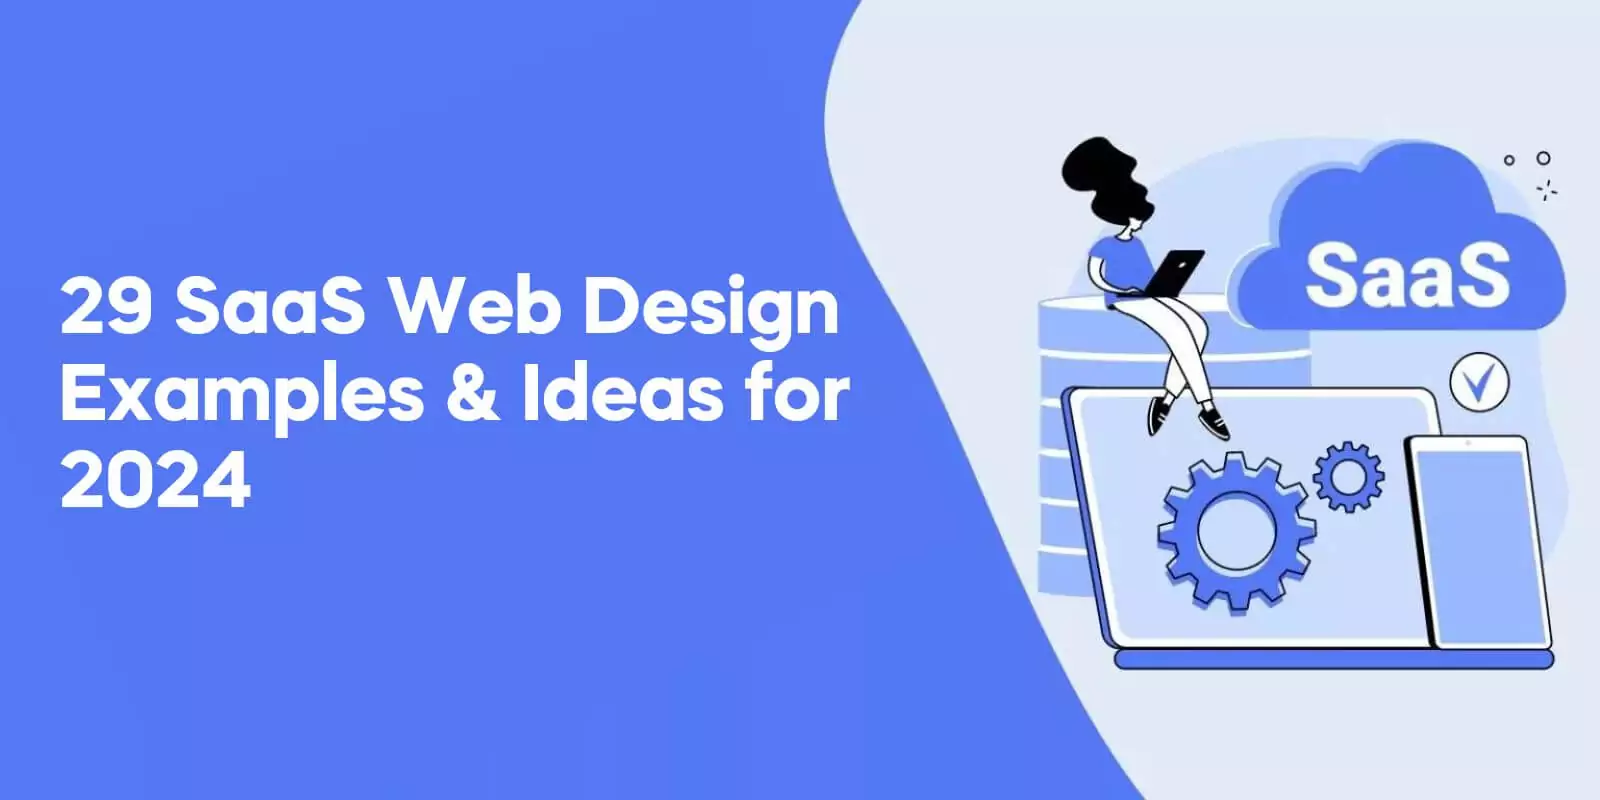 29 SaaS Web Design Examples & Ideas for 2024